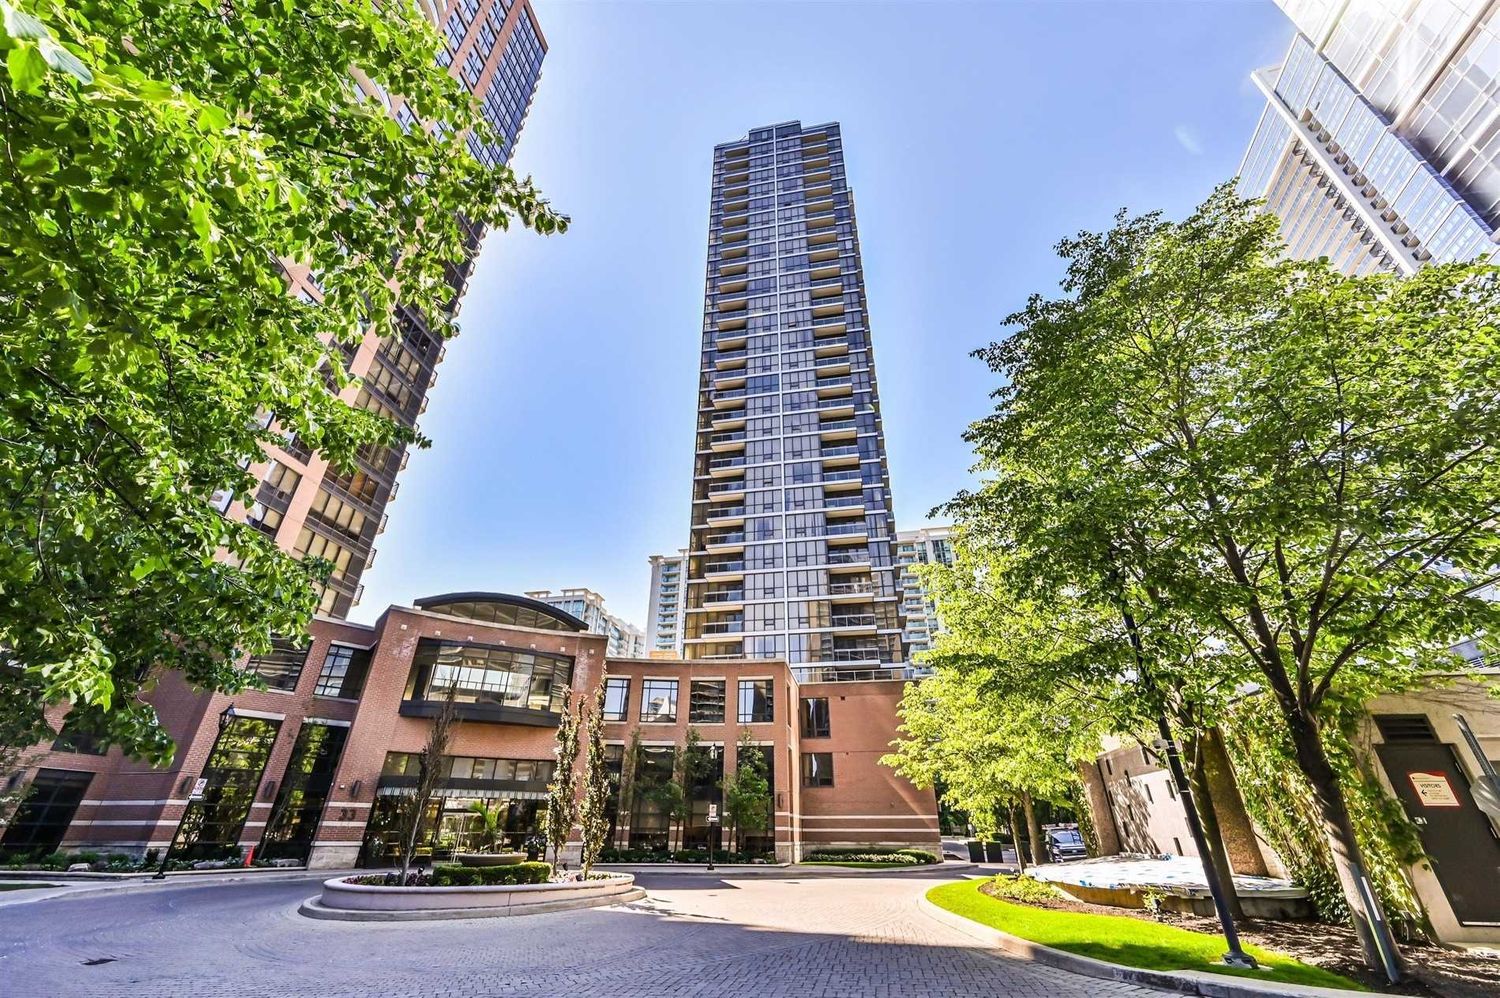 23 Sheppard Avenue E. Spring at Minto Gardens Condos is located in  North York, Toronto - image #1 of 3